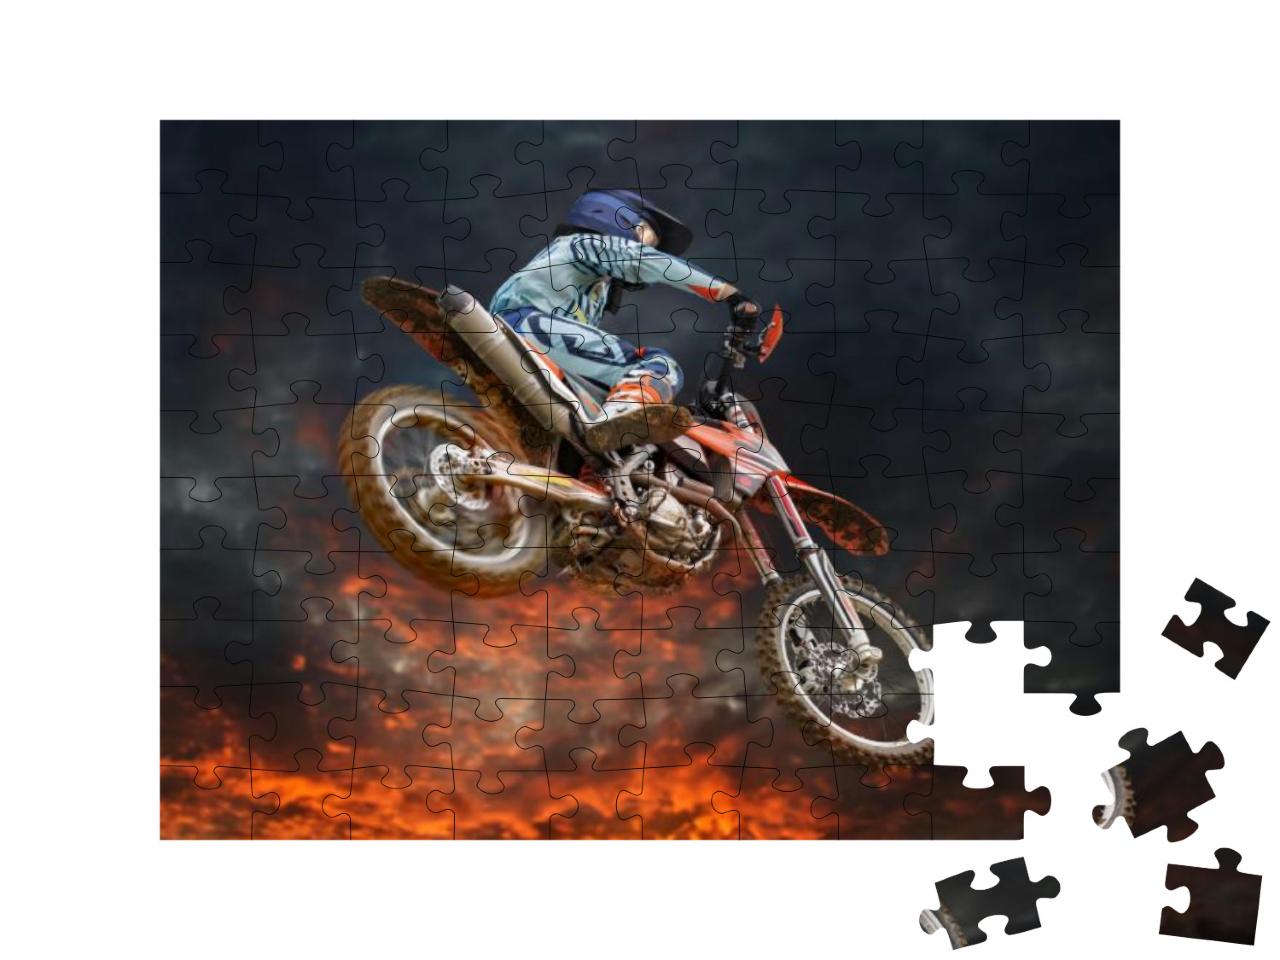 Jumping Motocross Rider with Firestorm in the Background... Jigsaw Puzzle with 100 pieces